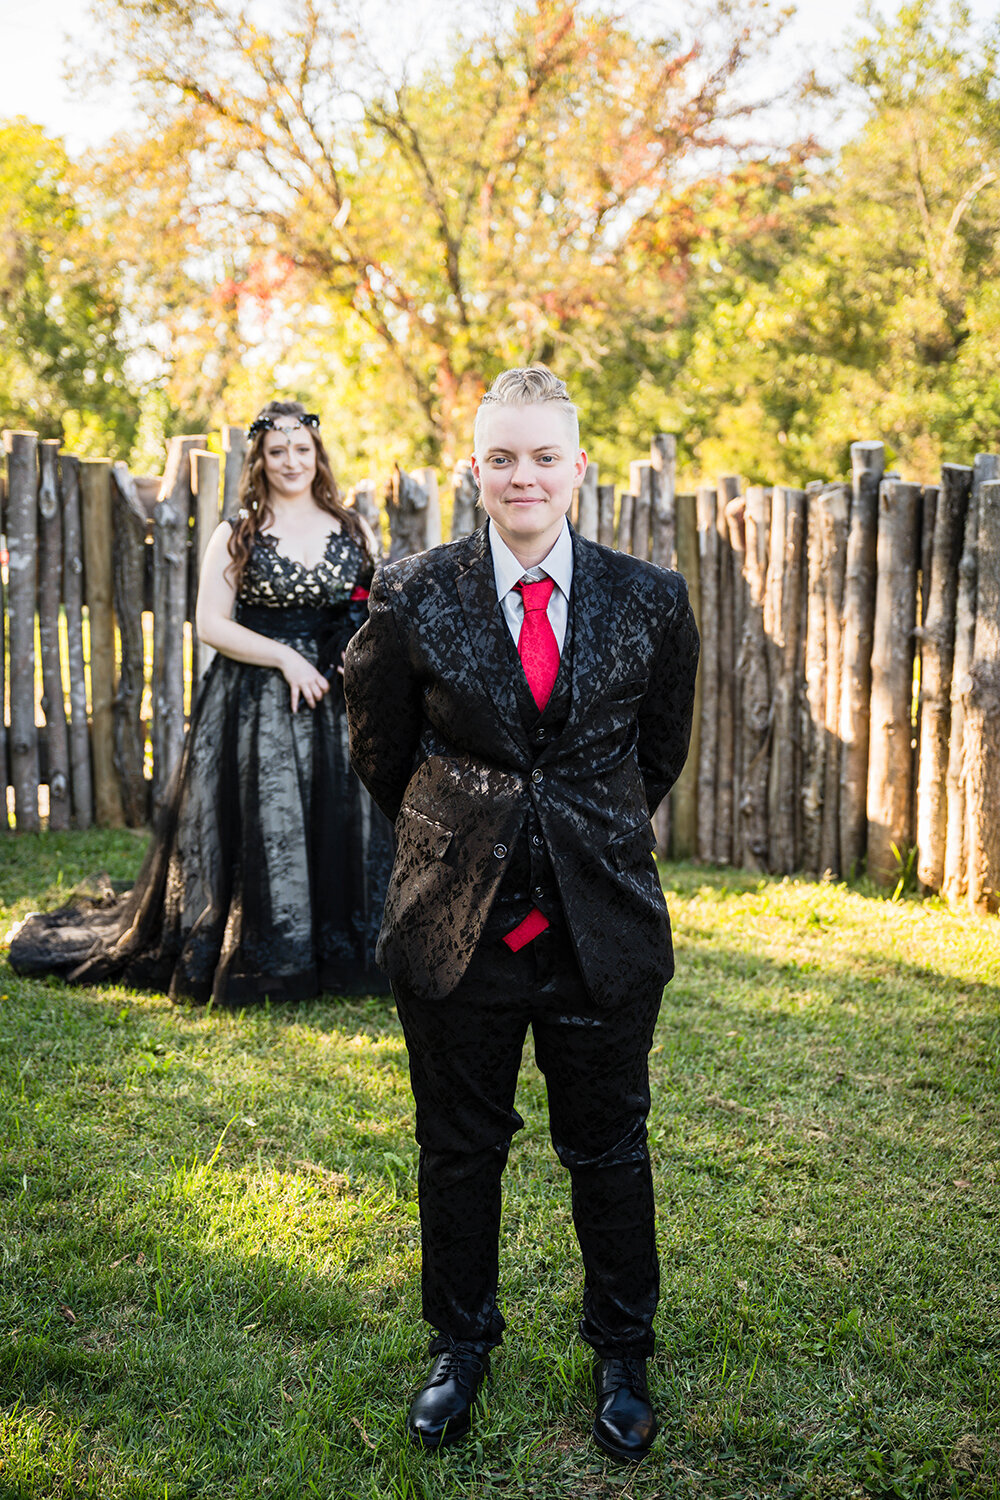 Two LGBTQ+ marriers stand in the backyard of an Airbnb they rented in Roanoke, Virginia on their elopement. One marrier, dressed in a black floral suit, stands in front of another marrier, who is wearing a black dress. The marrier in the background looks at the back of the other’s head while the marrier in front grins waiting.